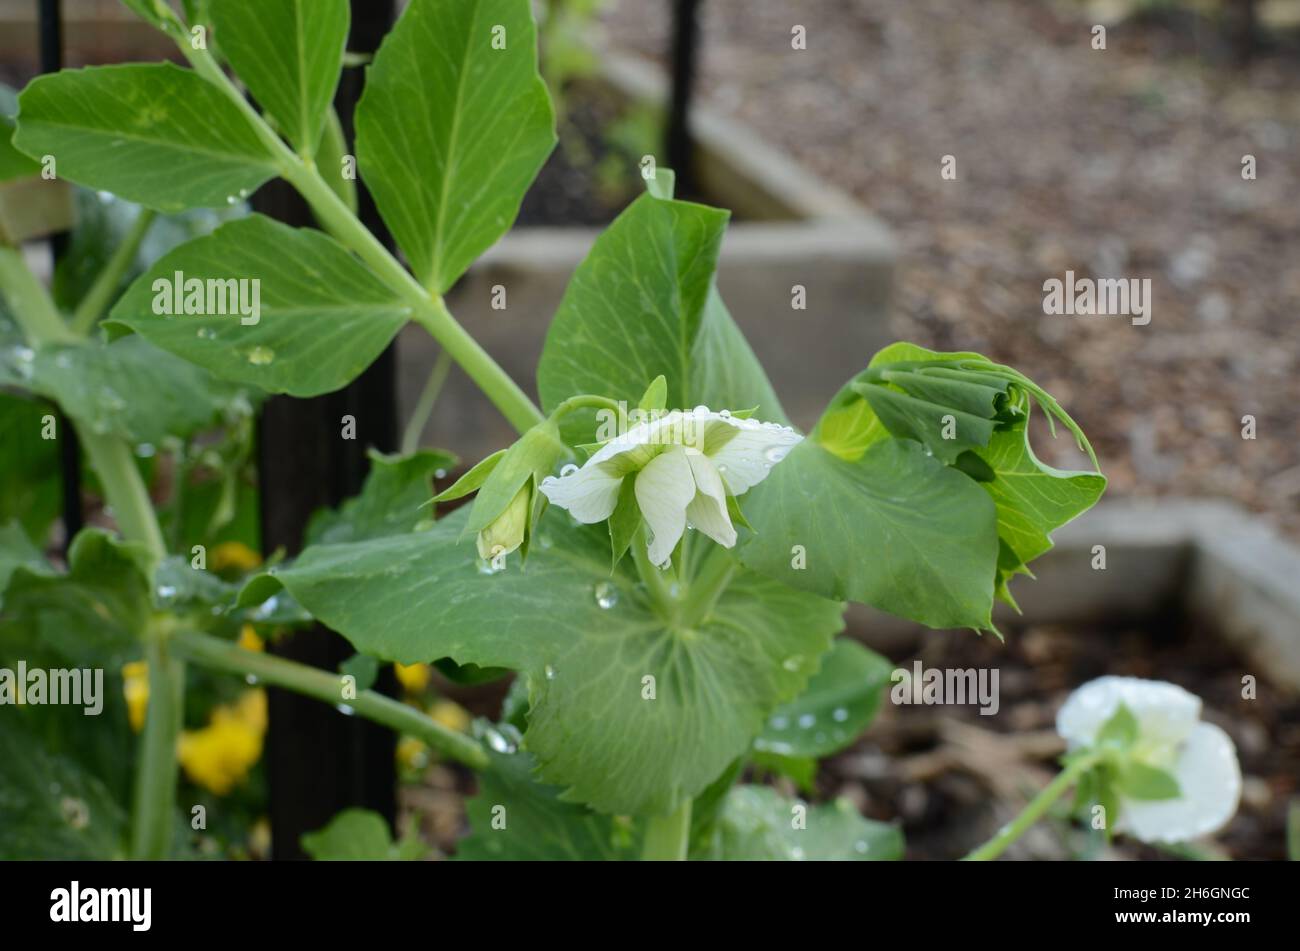 White Blossom On Pea Vine With Water Droplets. Stock Photo